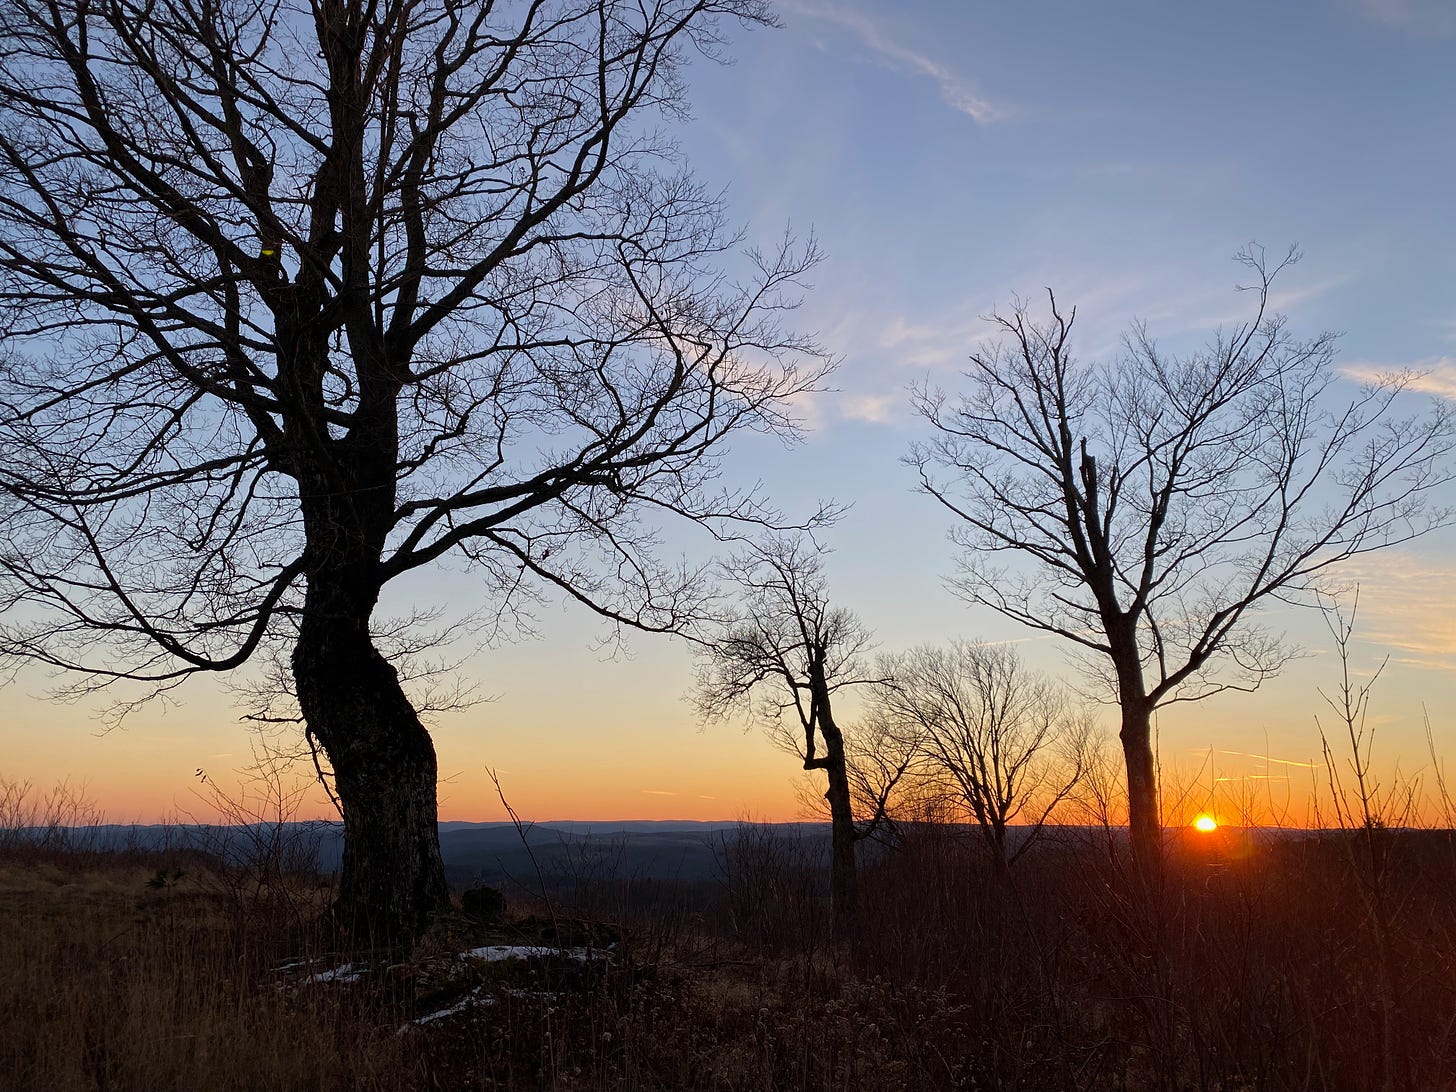 Dark silhouettes of several bare trees on a hill at sunset. The sky is a gradient of blue to pale orange to deep gold, and the sun is a bright orange orb, just dipping below the horizon.